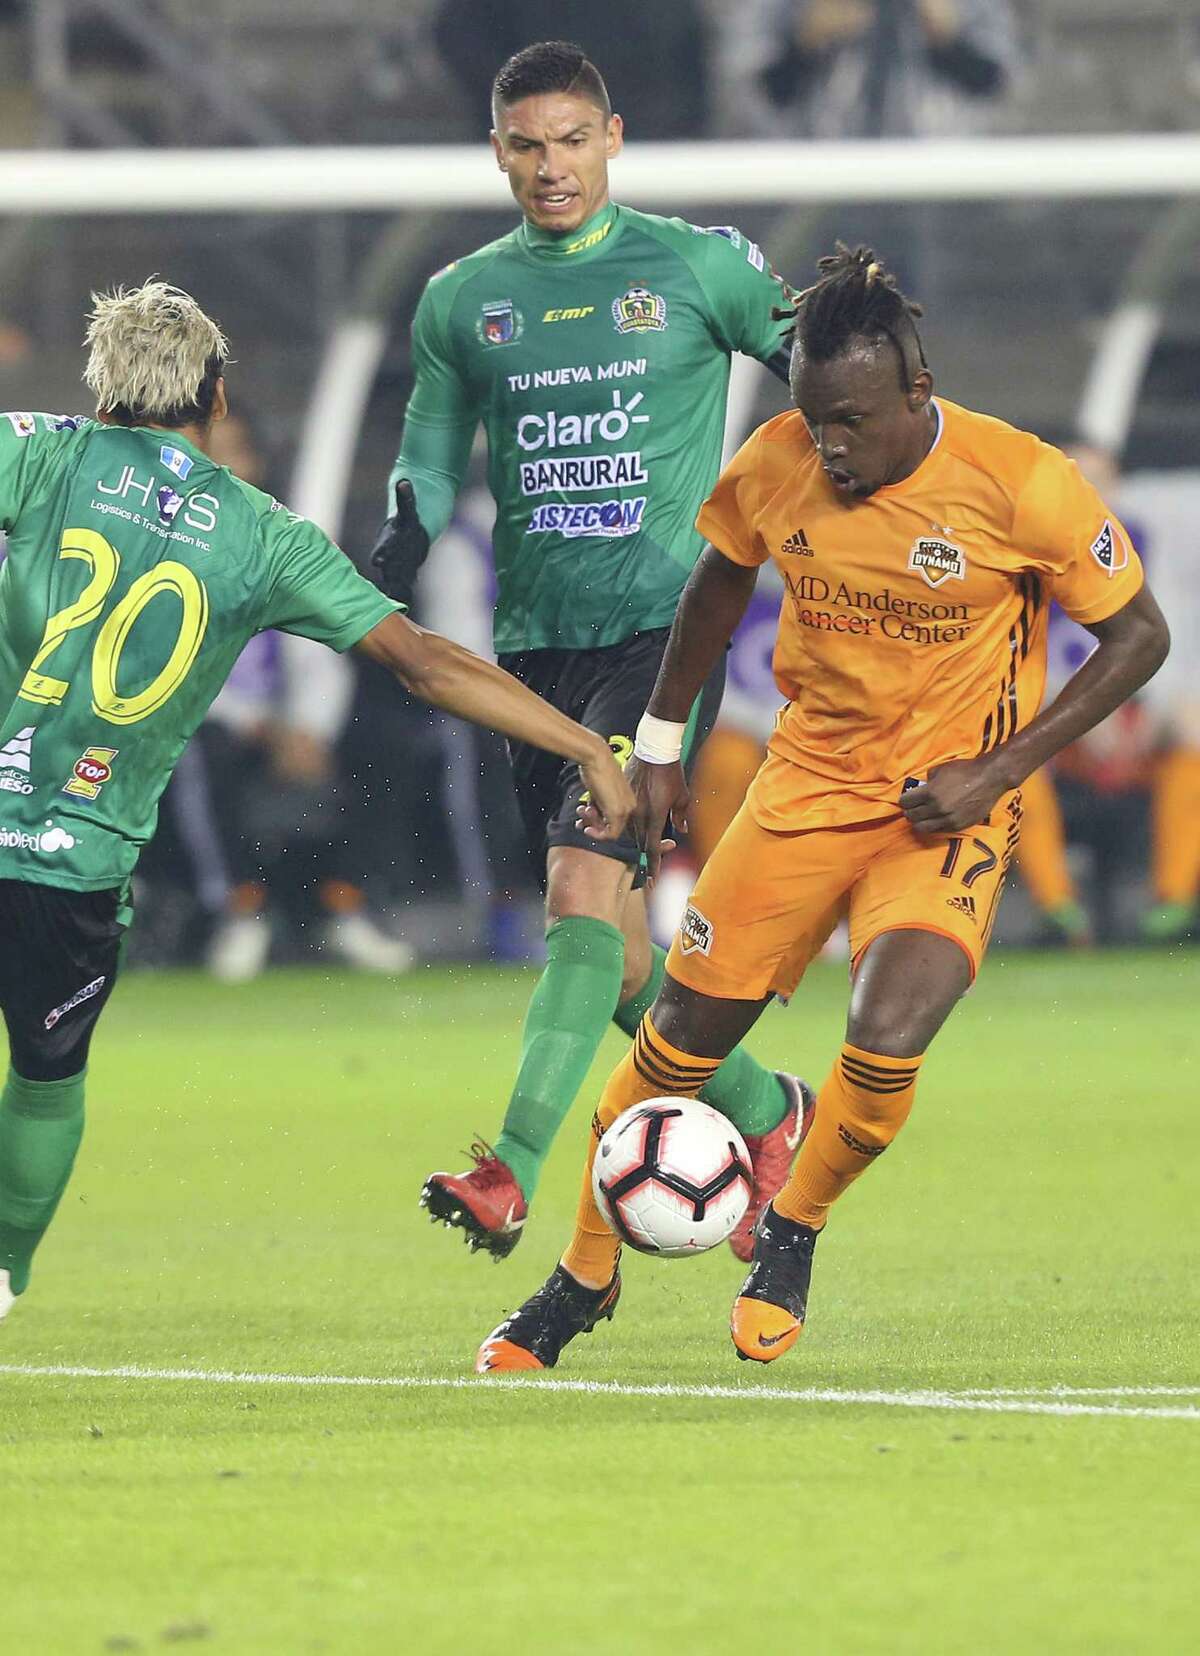 Houston Dynamo forward Alberth Elis (17) controls the ball in the second half against Guastatoya in round of 16, leg 2 of 2 for the Concacaf Championship League at BBVA Compass Stadium on Monday, Feb. 26, 2019 in Houston. Houston won the rain-delayed game 2-1.